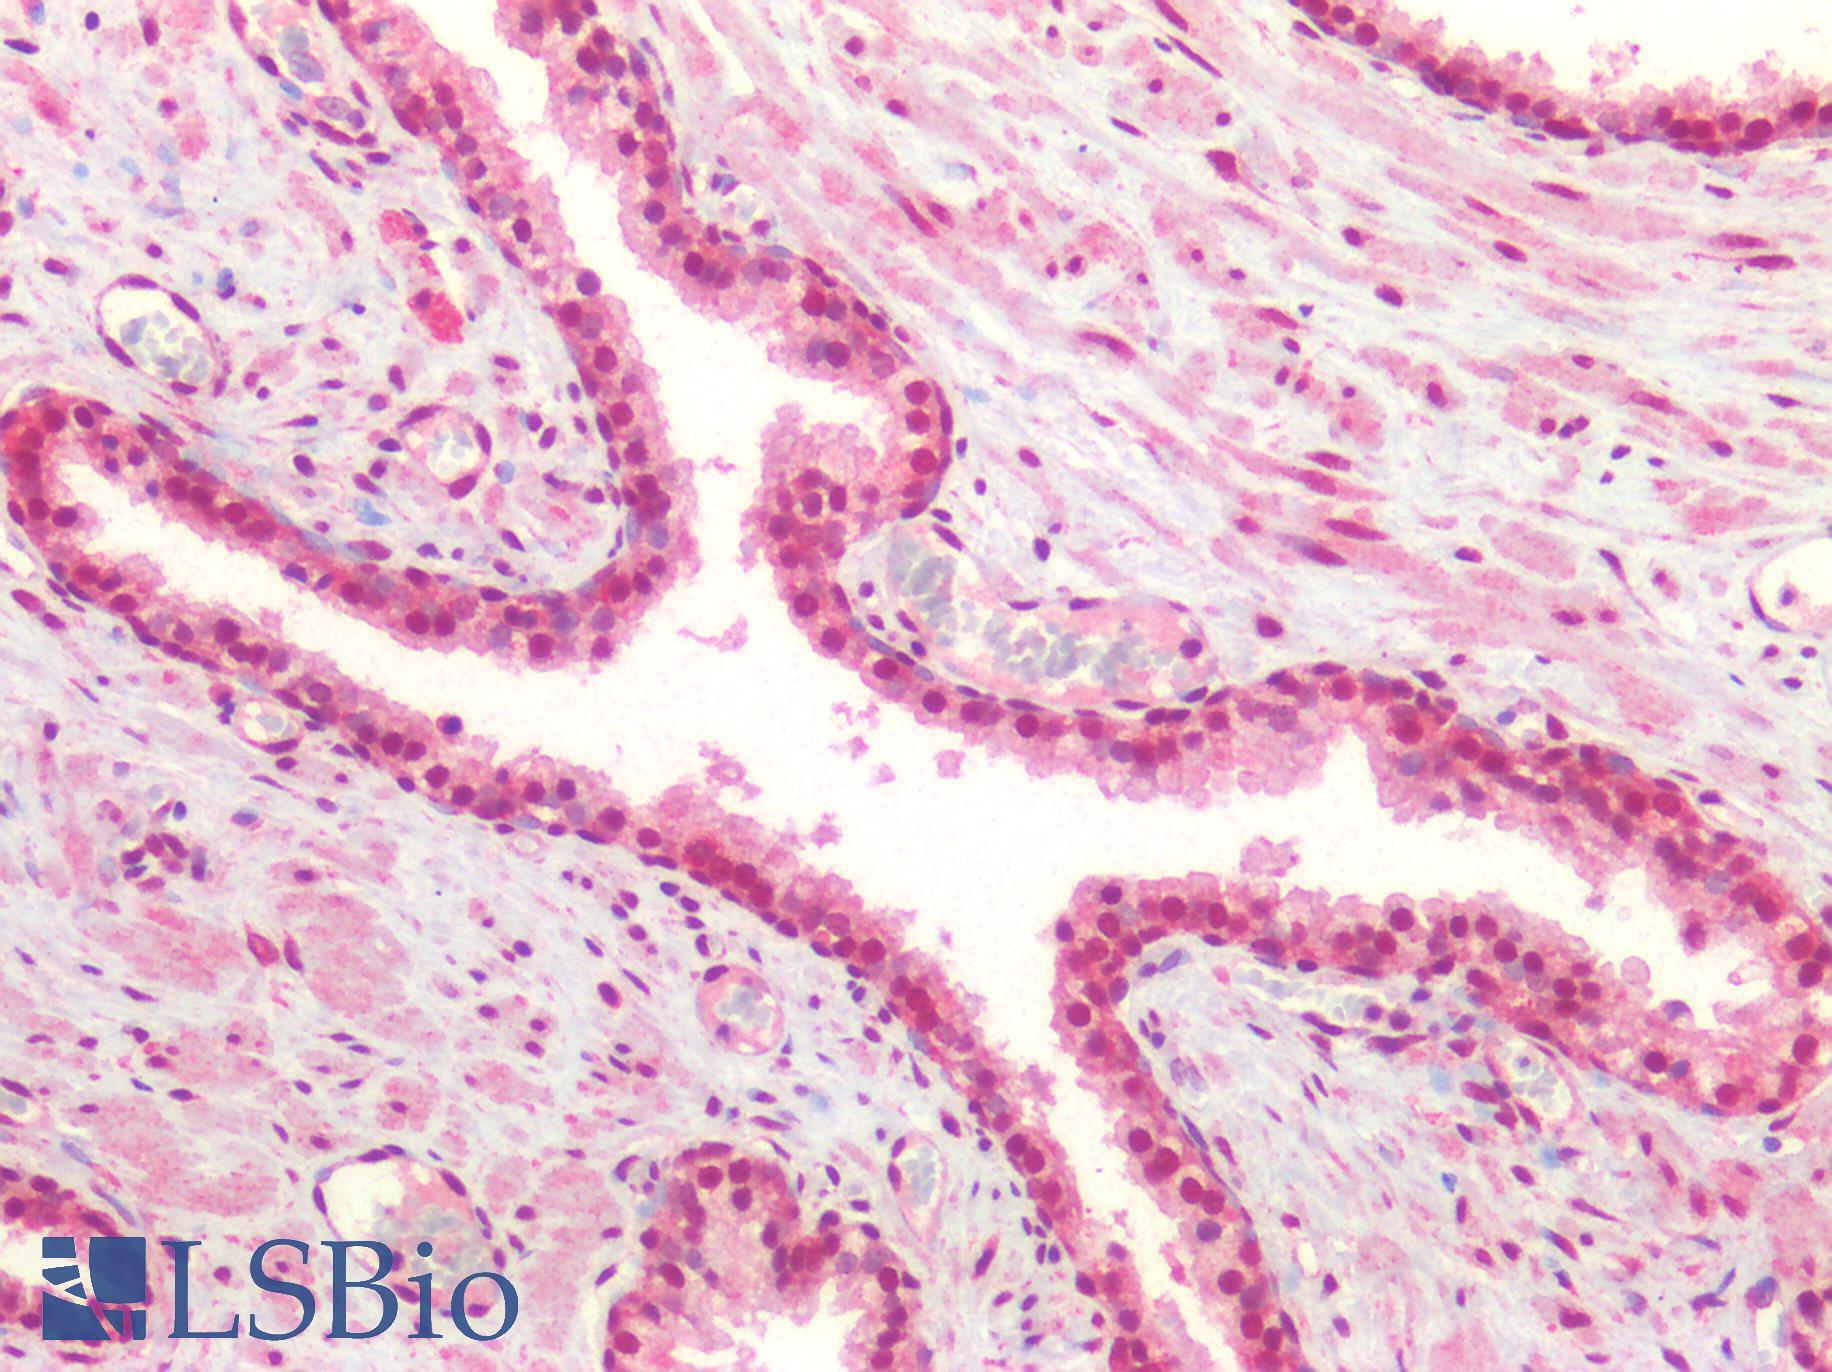 FOXP1 Antibody - Human Prostate: Formalin-Fixed, Paraffin-Embedded (FFPE)